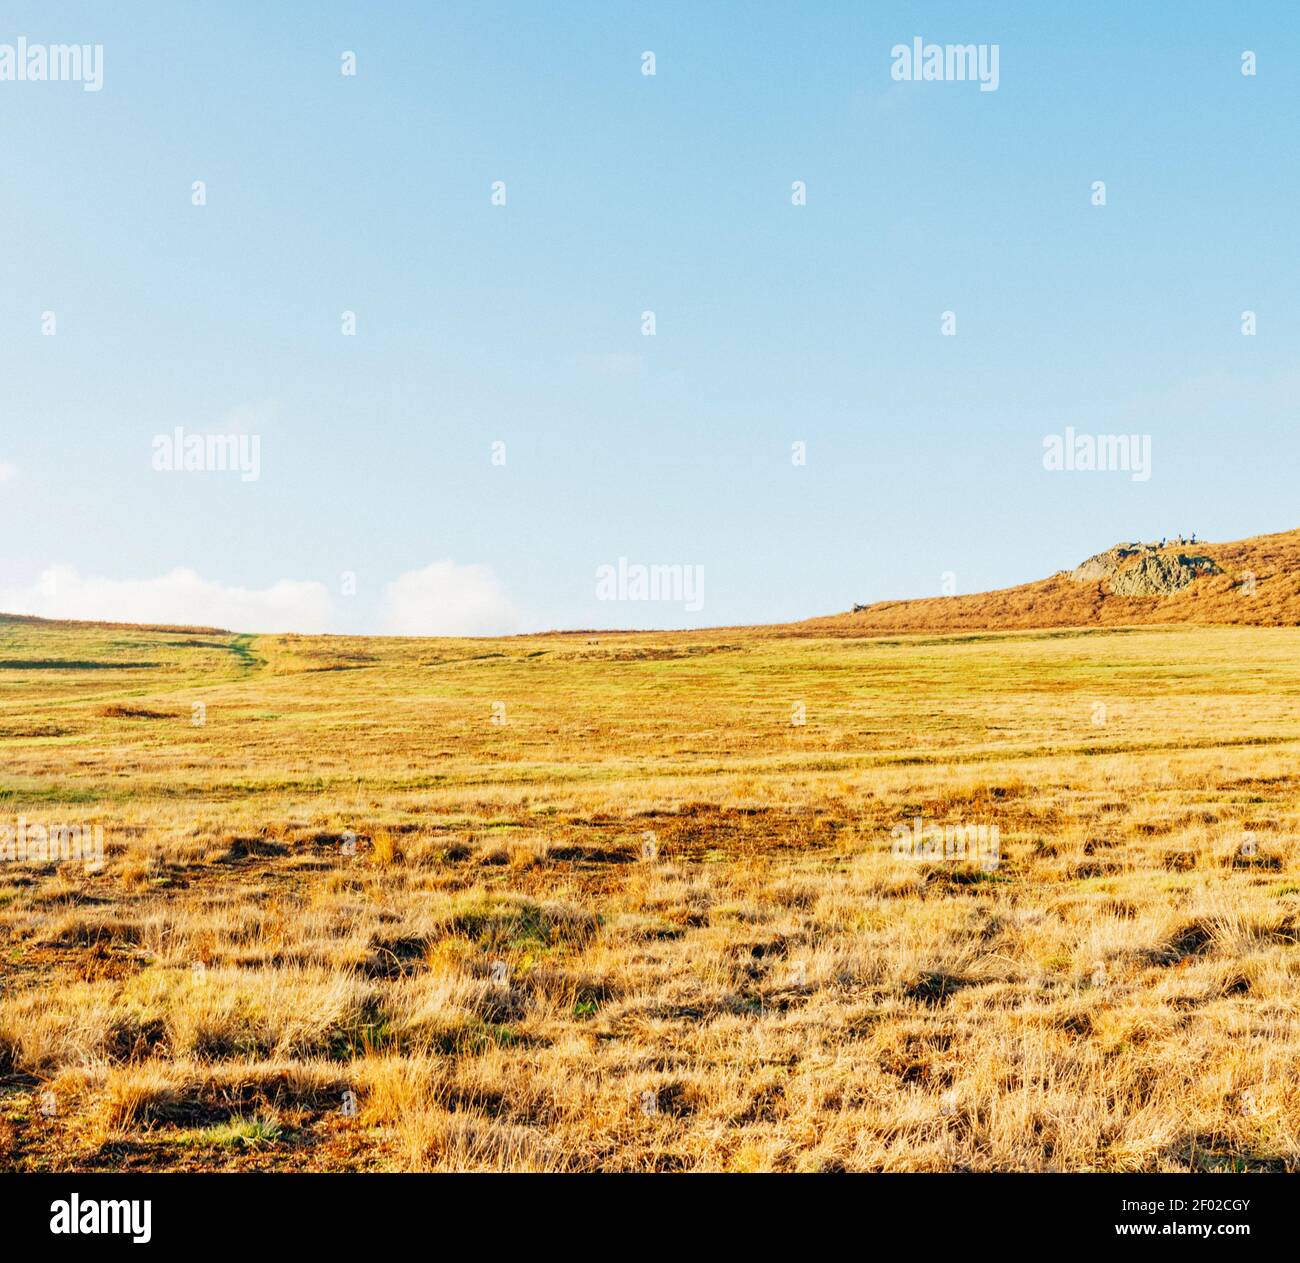 Large landscape grassy area, with a hill in the background. Blue and mars-like brown and orange colours. Stock Photo